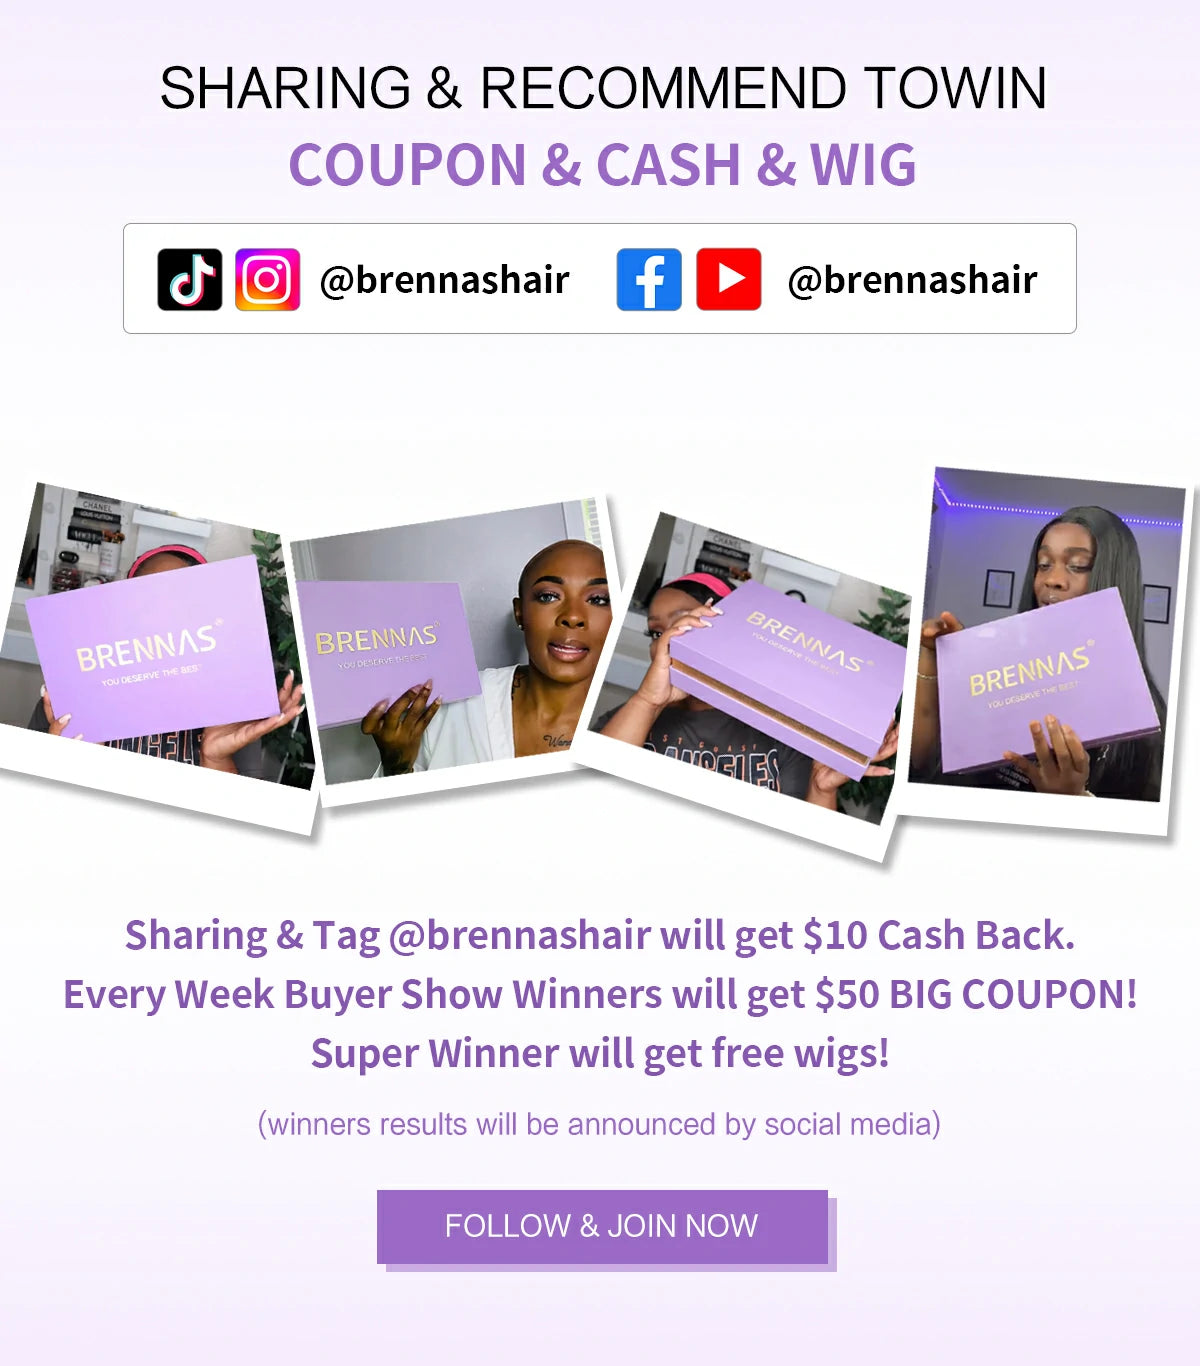 Sharing & Tag @brennashair will get $10 Cash BackEvery Week Buyer Show Winners will get $50 BIG COUPON!Super Winner will get free wigs!